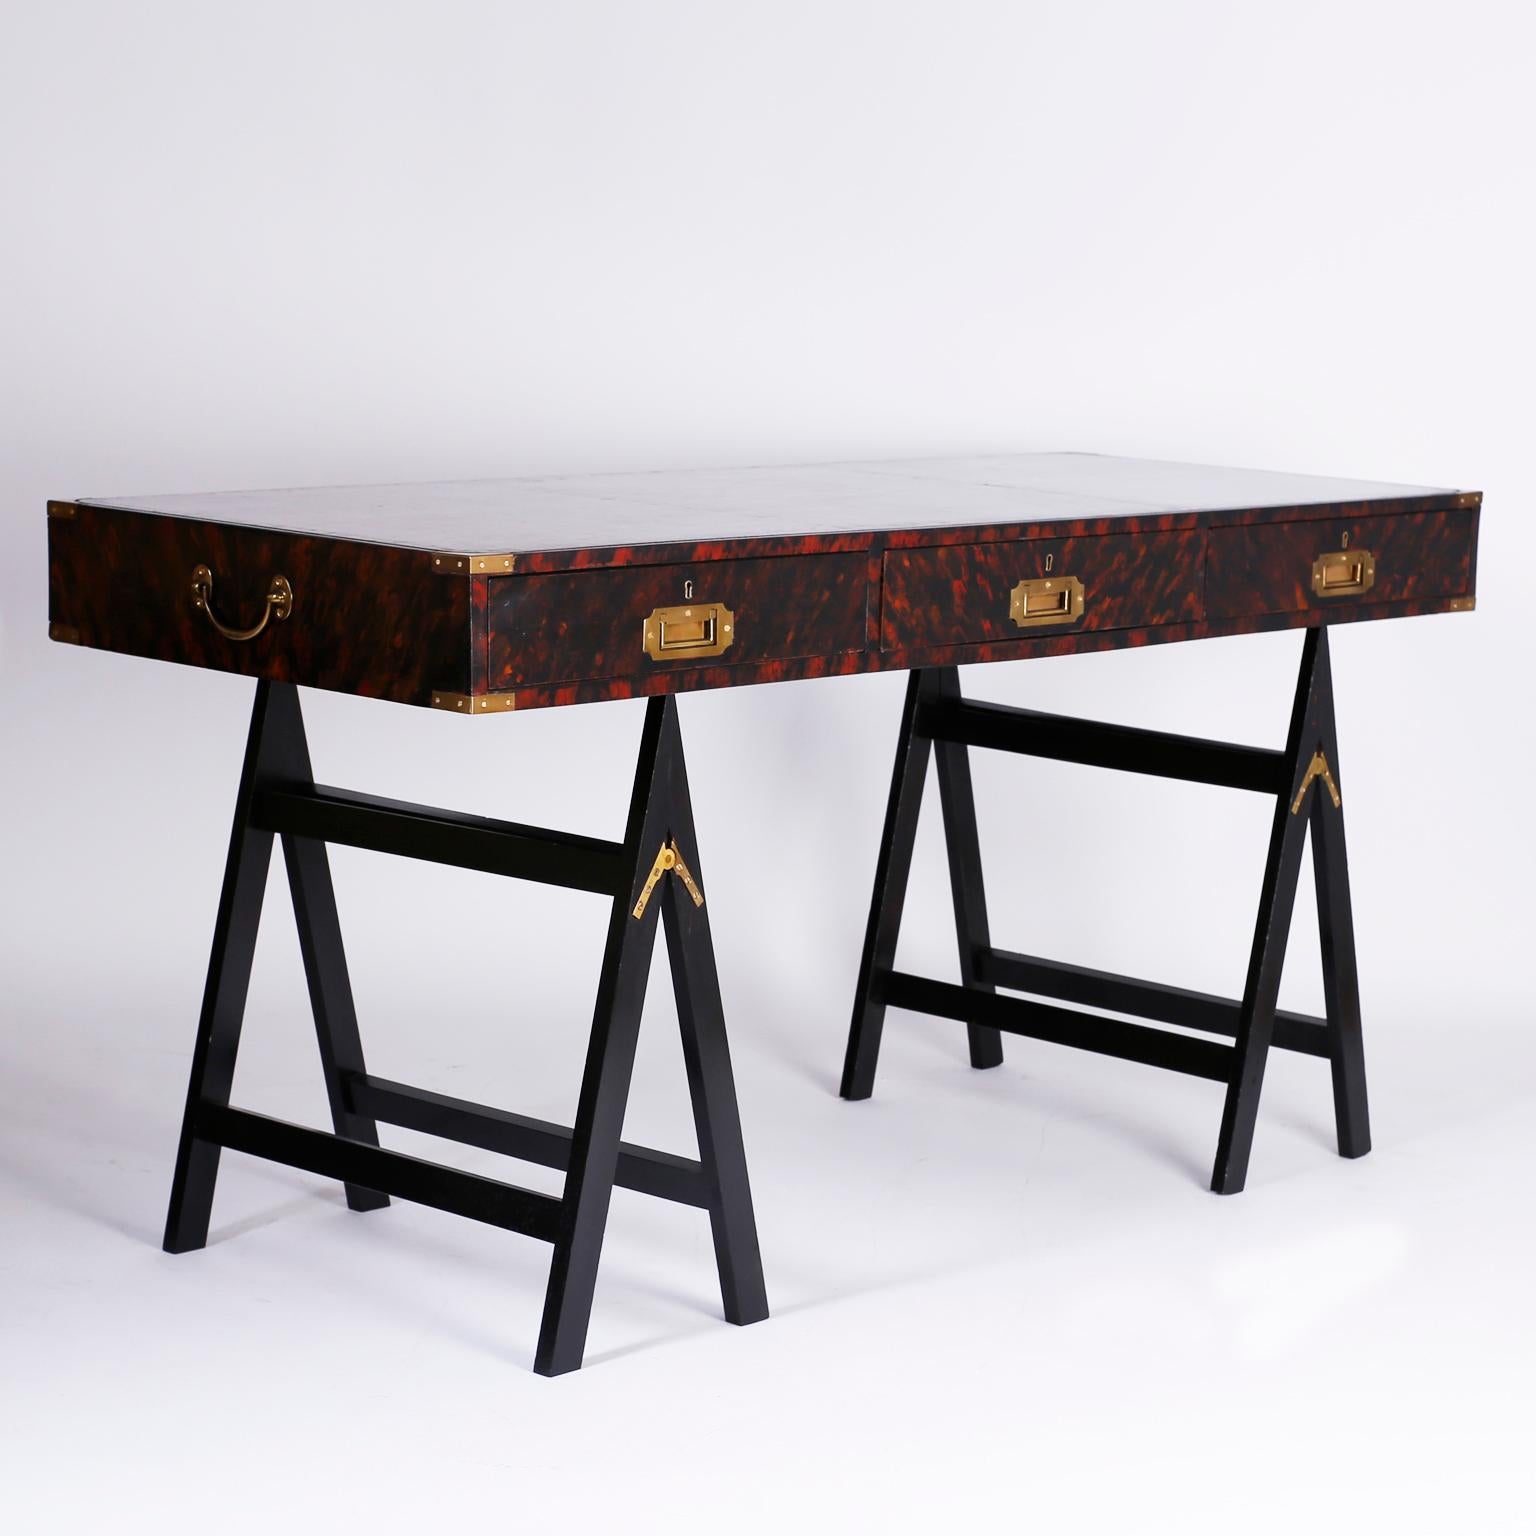 19th Century English Campaign Style Desk with a Faux Tortoise Shell Finish 3